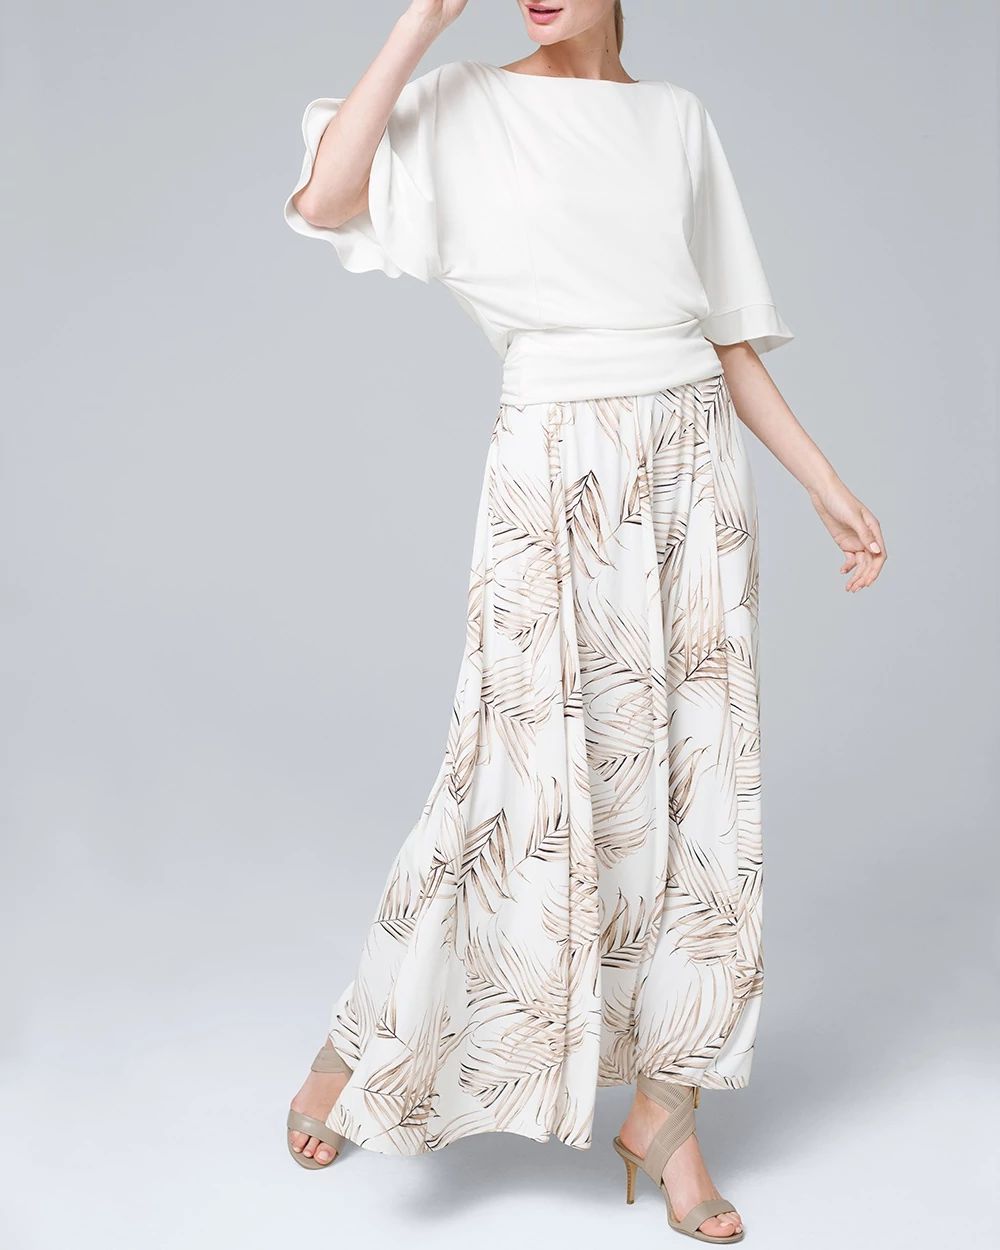 FLORAL ICONIC MAXI SKIRT click to view larger image.